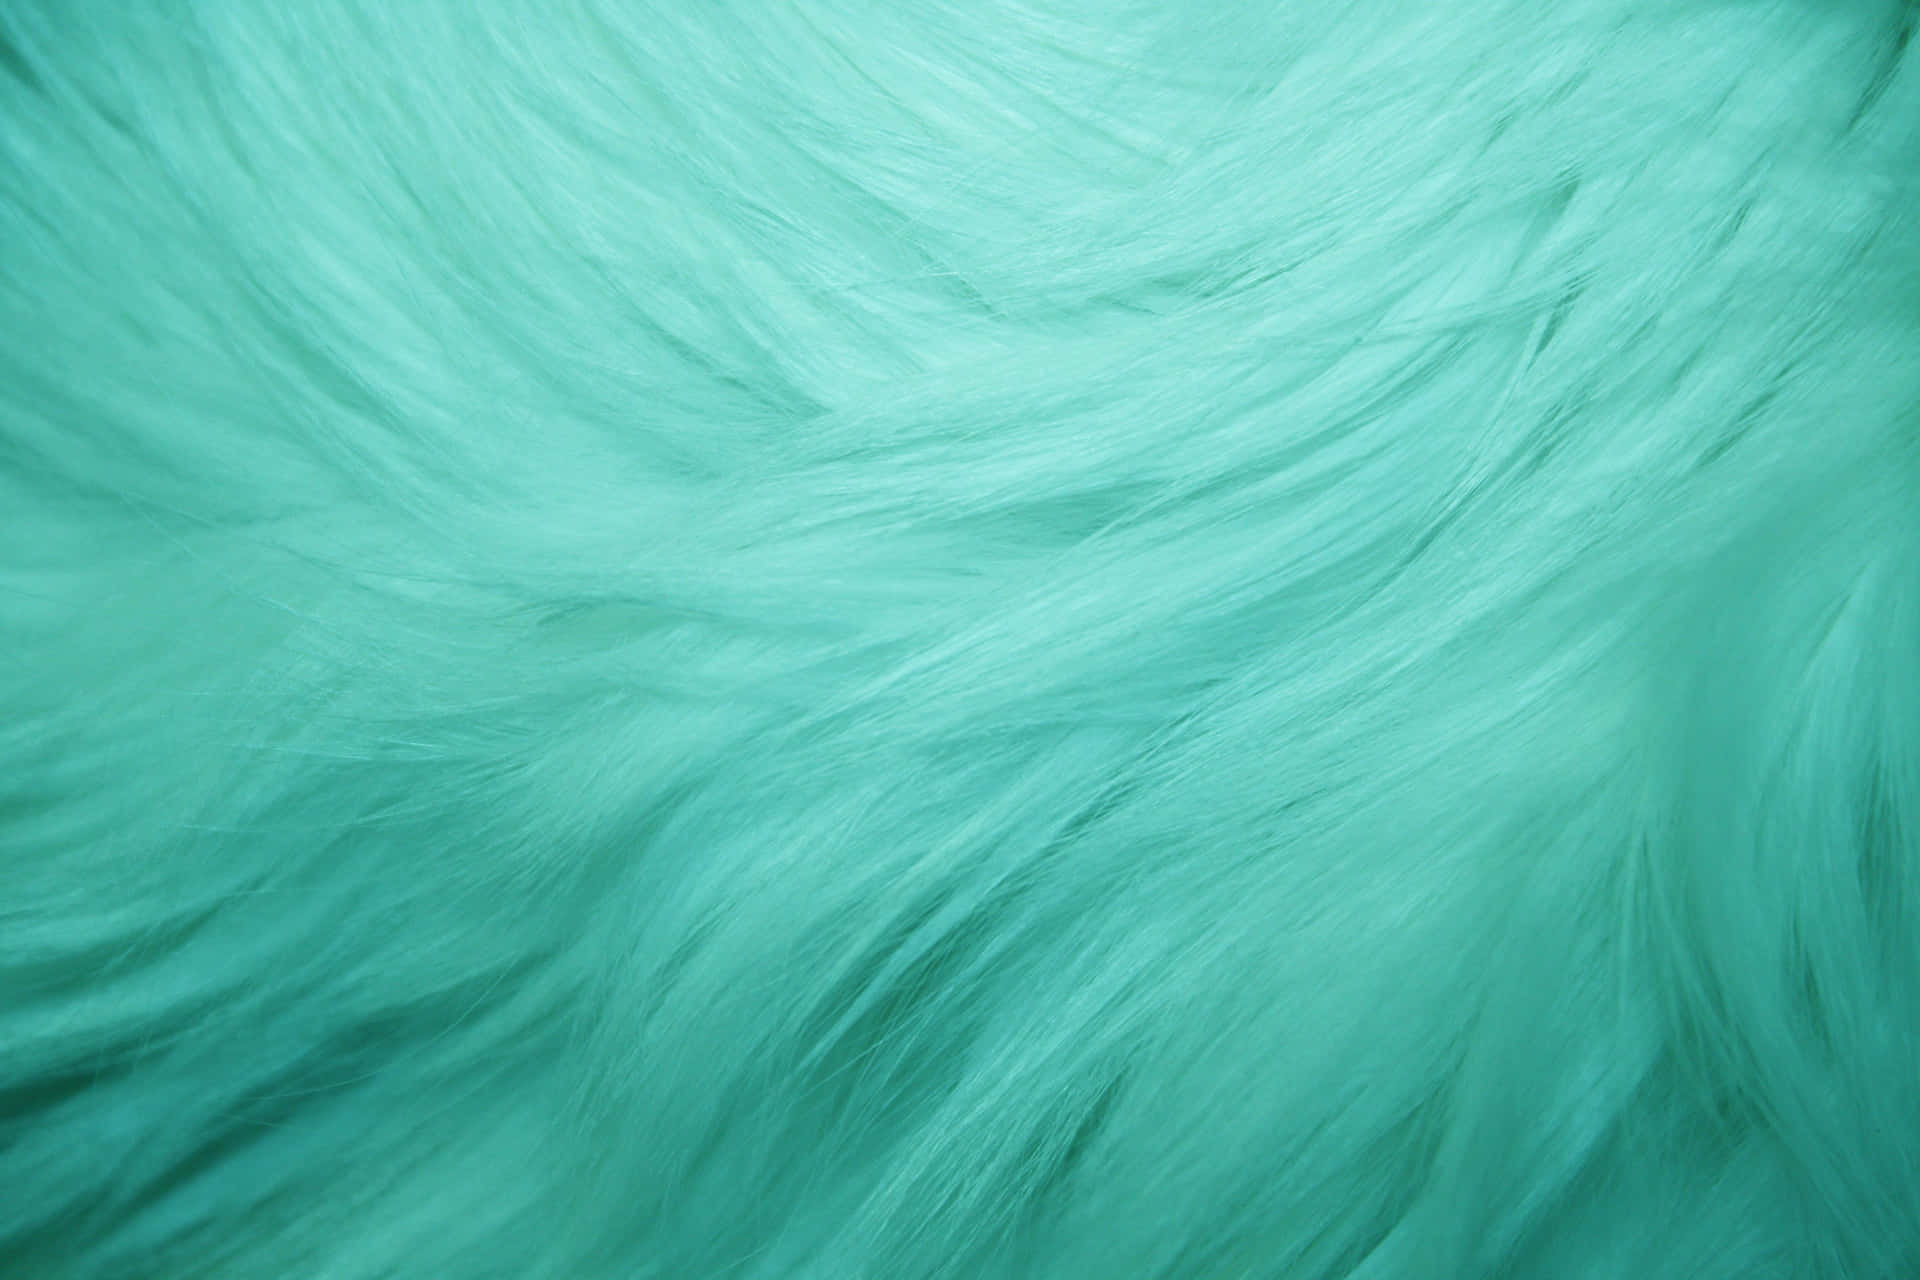 Brighten up any space with this turquoise background.